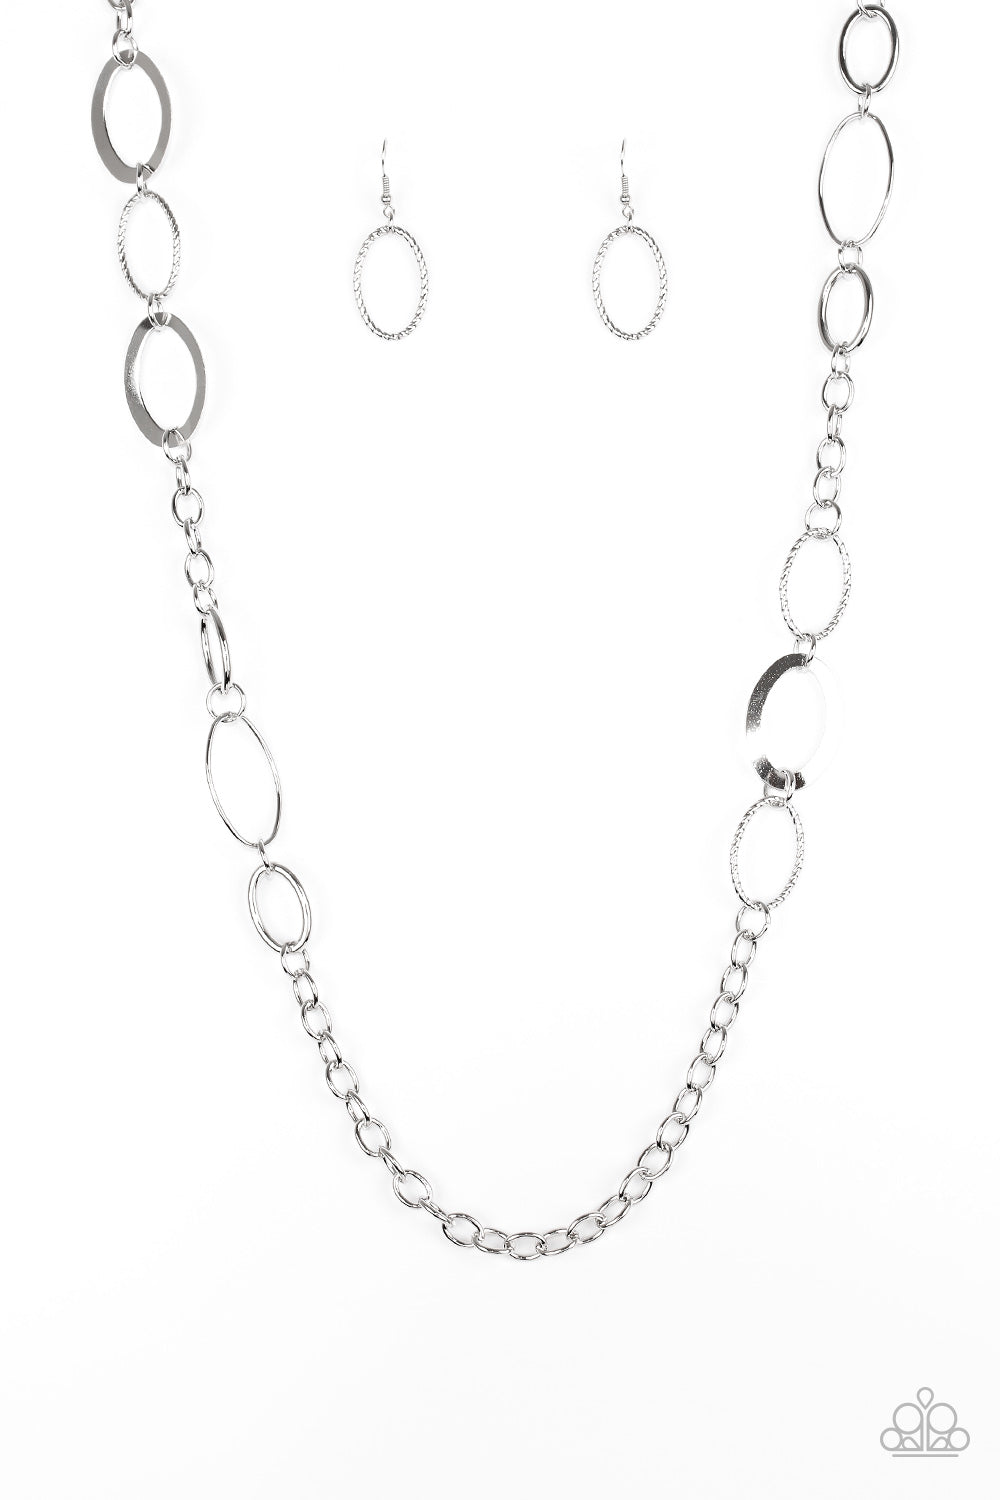 Paparazzi Chain Cadence Silver Long Necklace